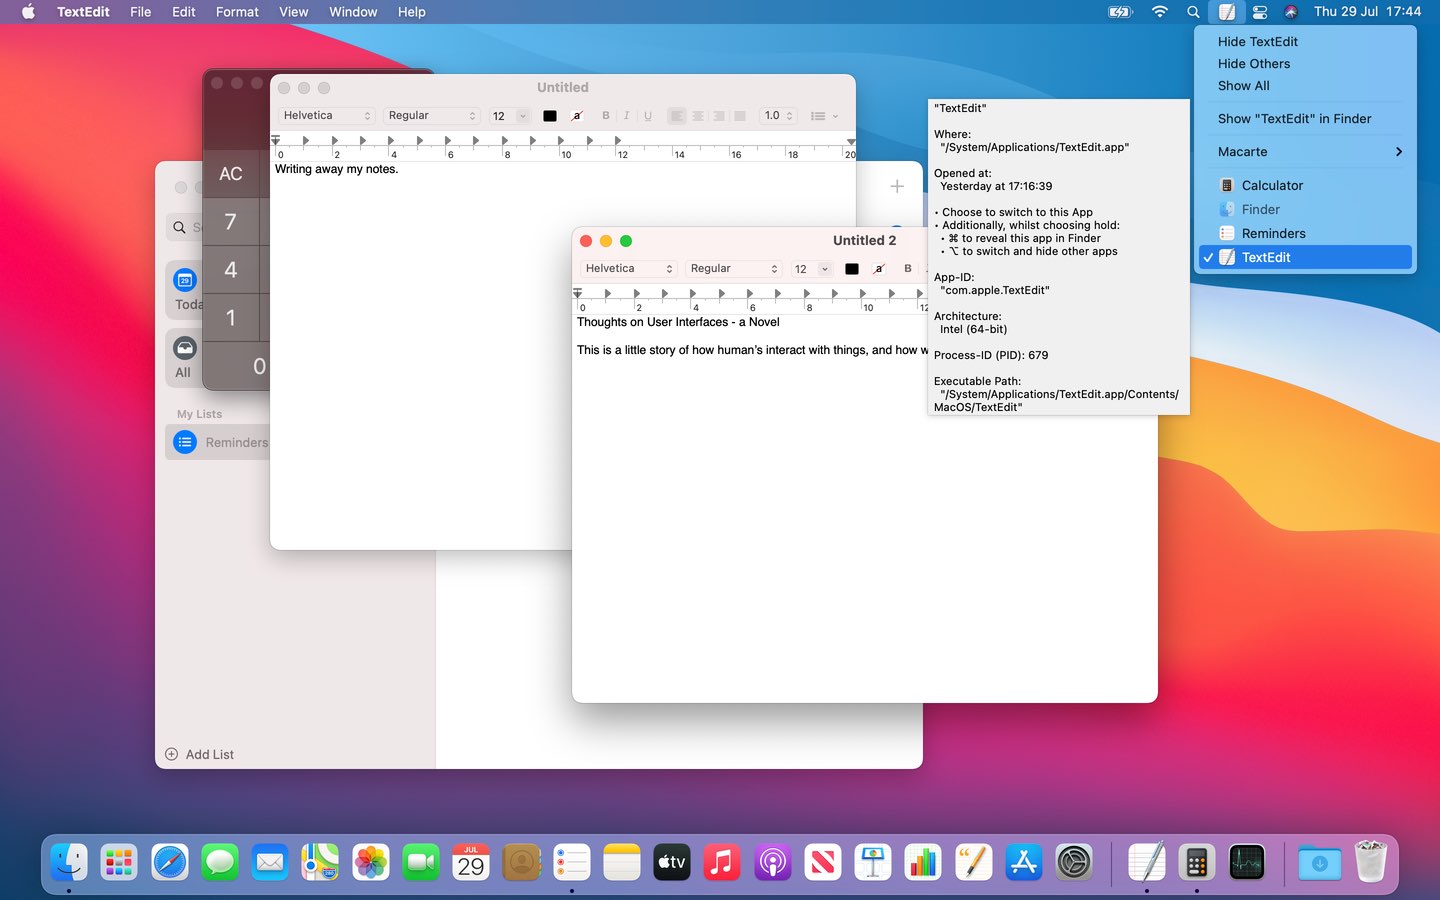 Image of the macOS Desktop with Macarte's menu showing a Tooltip of information about a running app